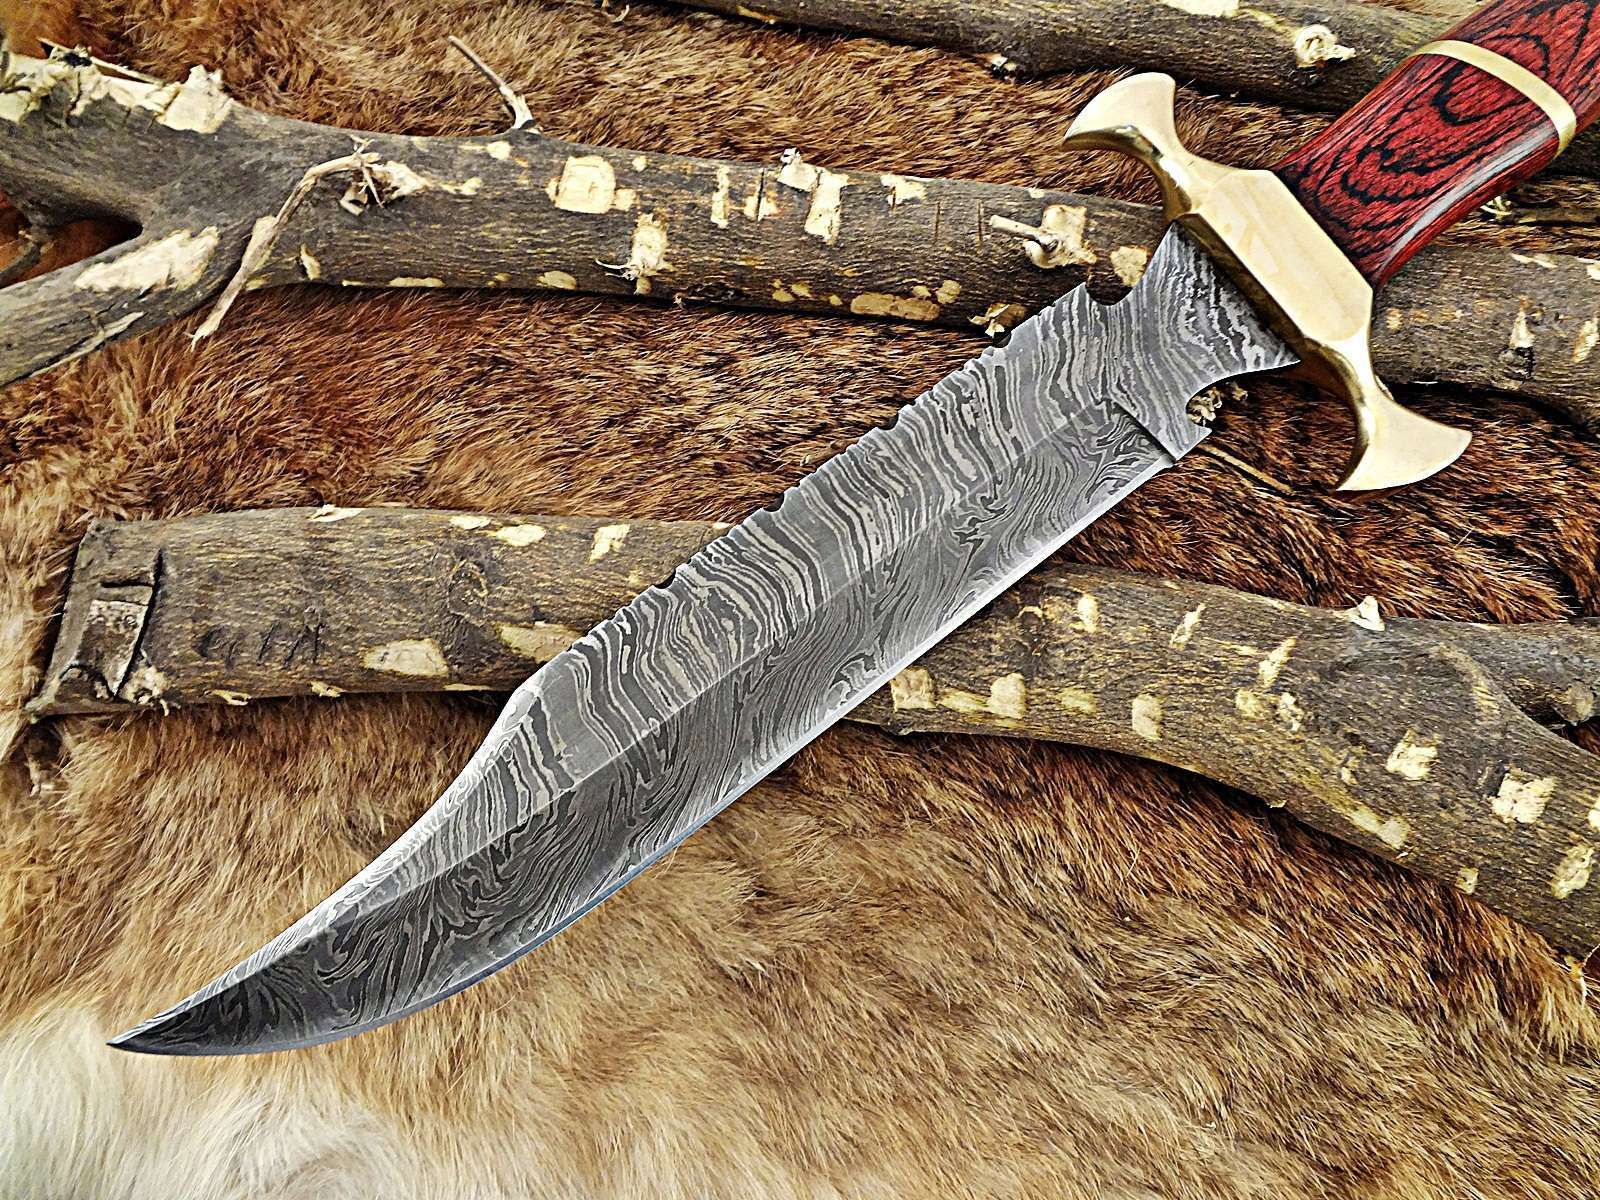 Engraved brass scale Cow sheath 15" Damascus Bowie hunting knife 2 colors 